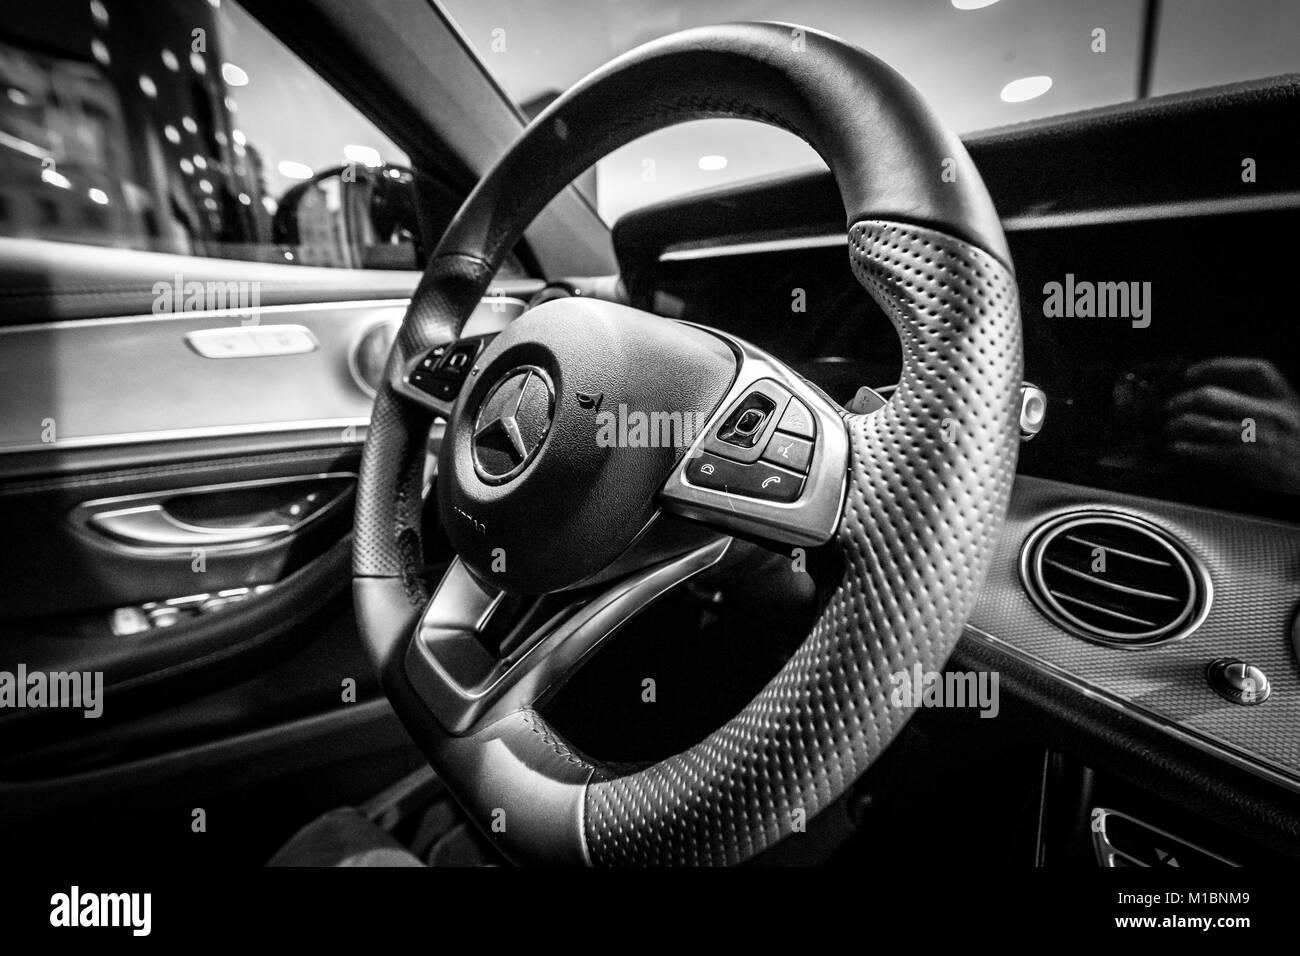 BERLIN - DECEMBER 21, 2017: Showroom. Cabin of the executive car Mercedes-Benz E-Class E220d (W213). Close-up. Black and white. Since 2017. Stock Photo